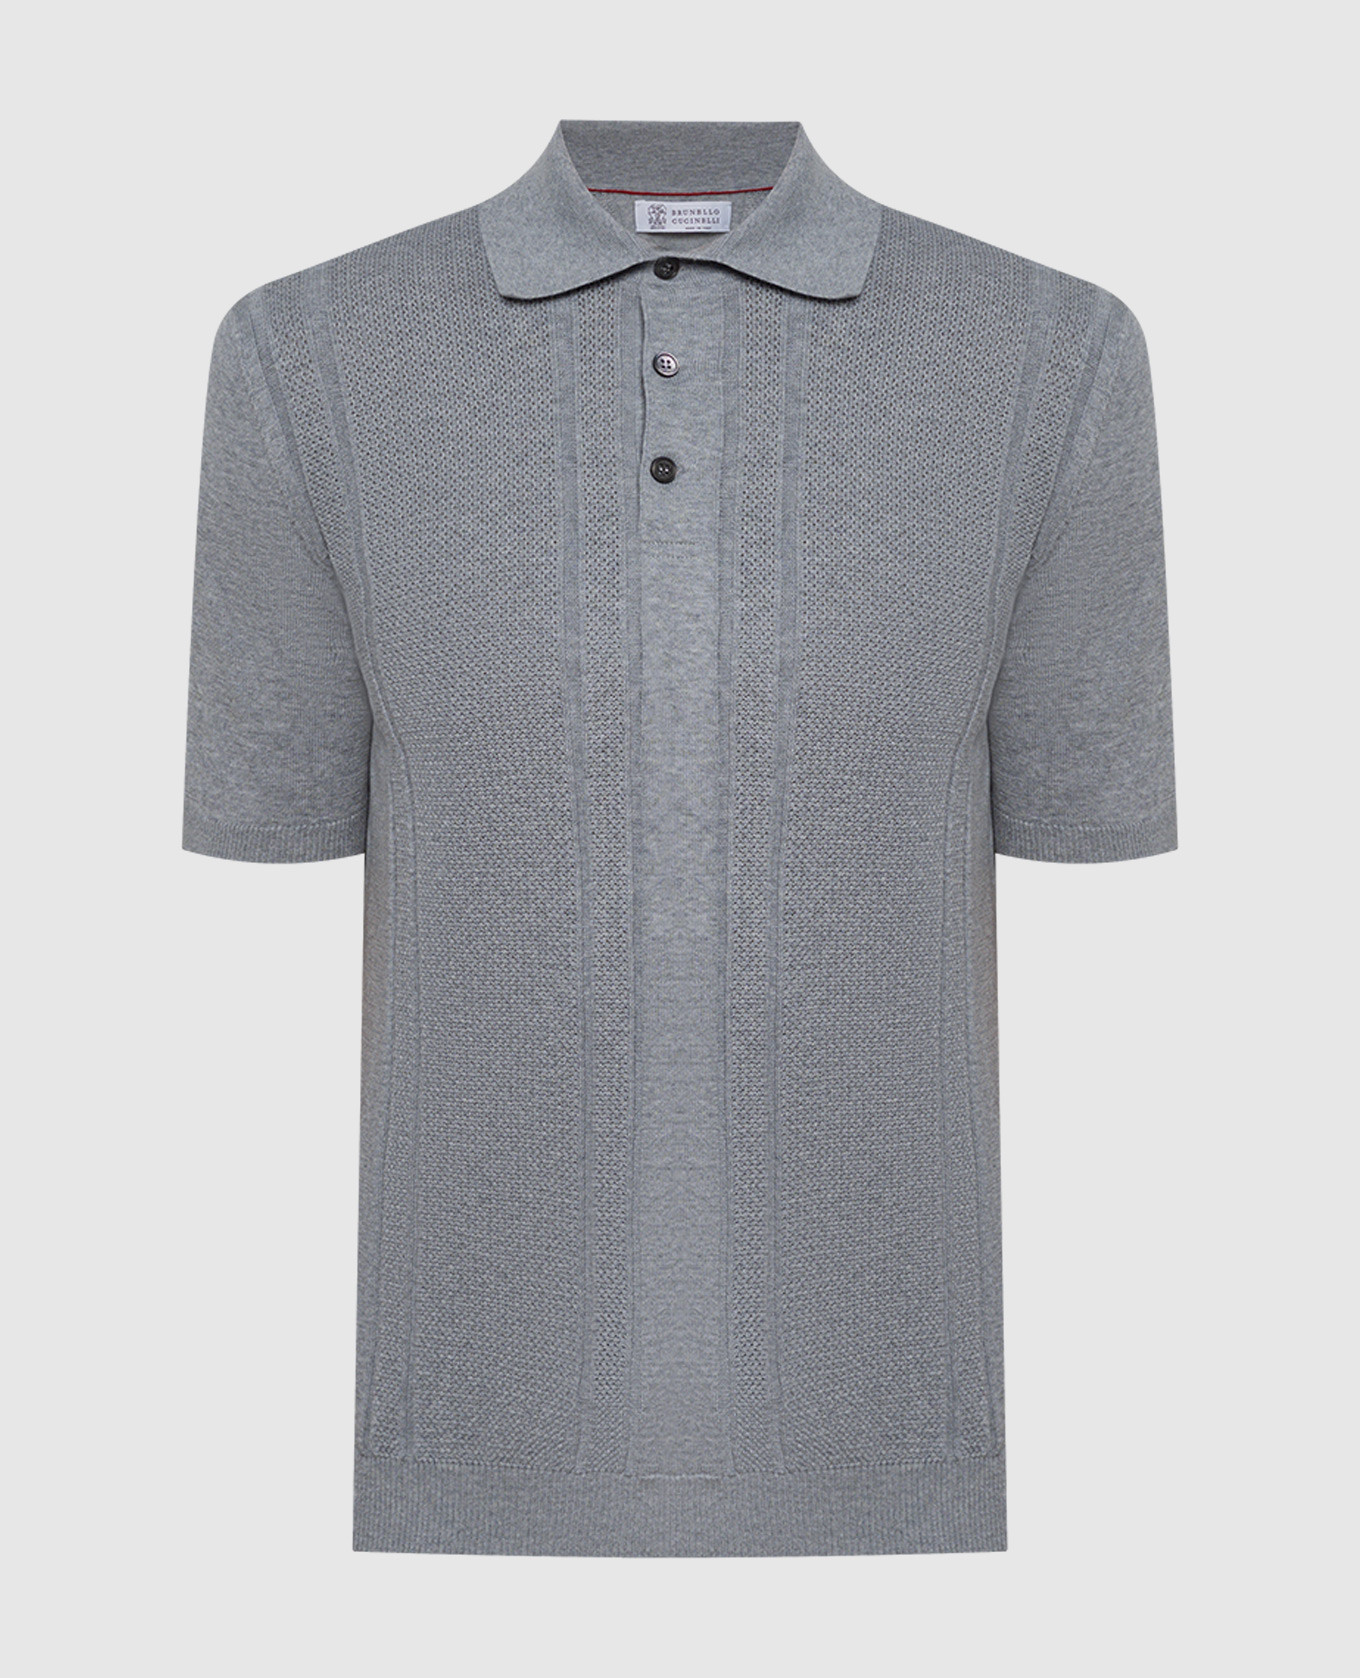 Gray polo shirt with a textured pattern